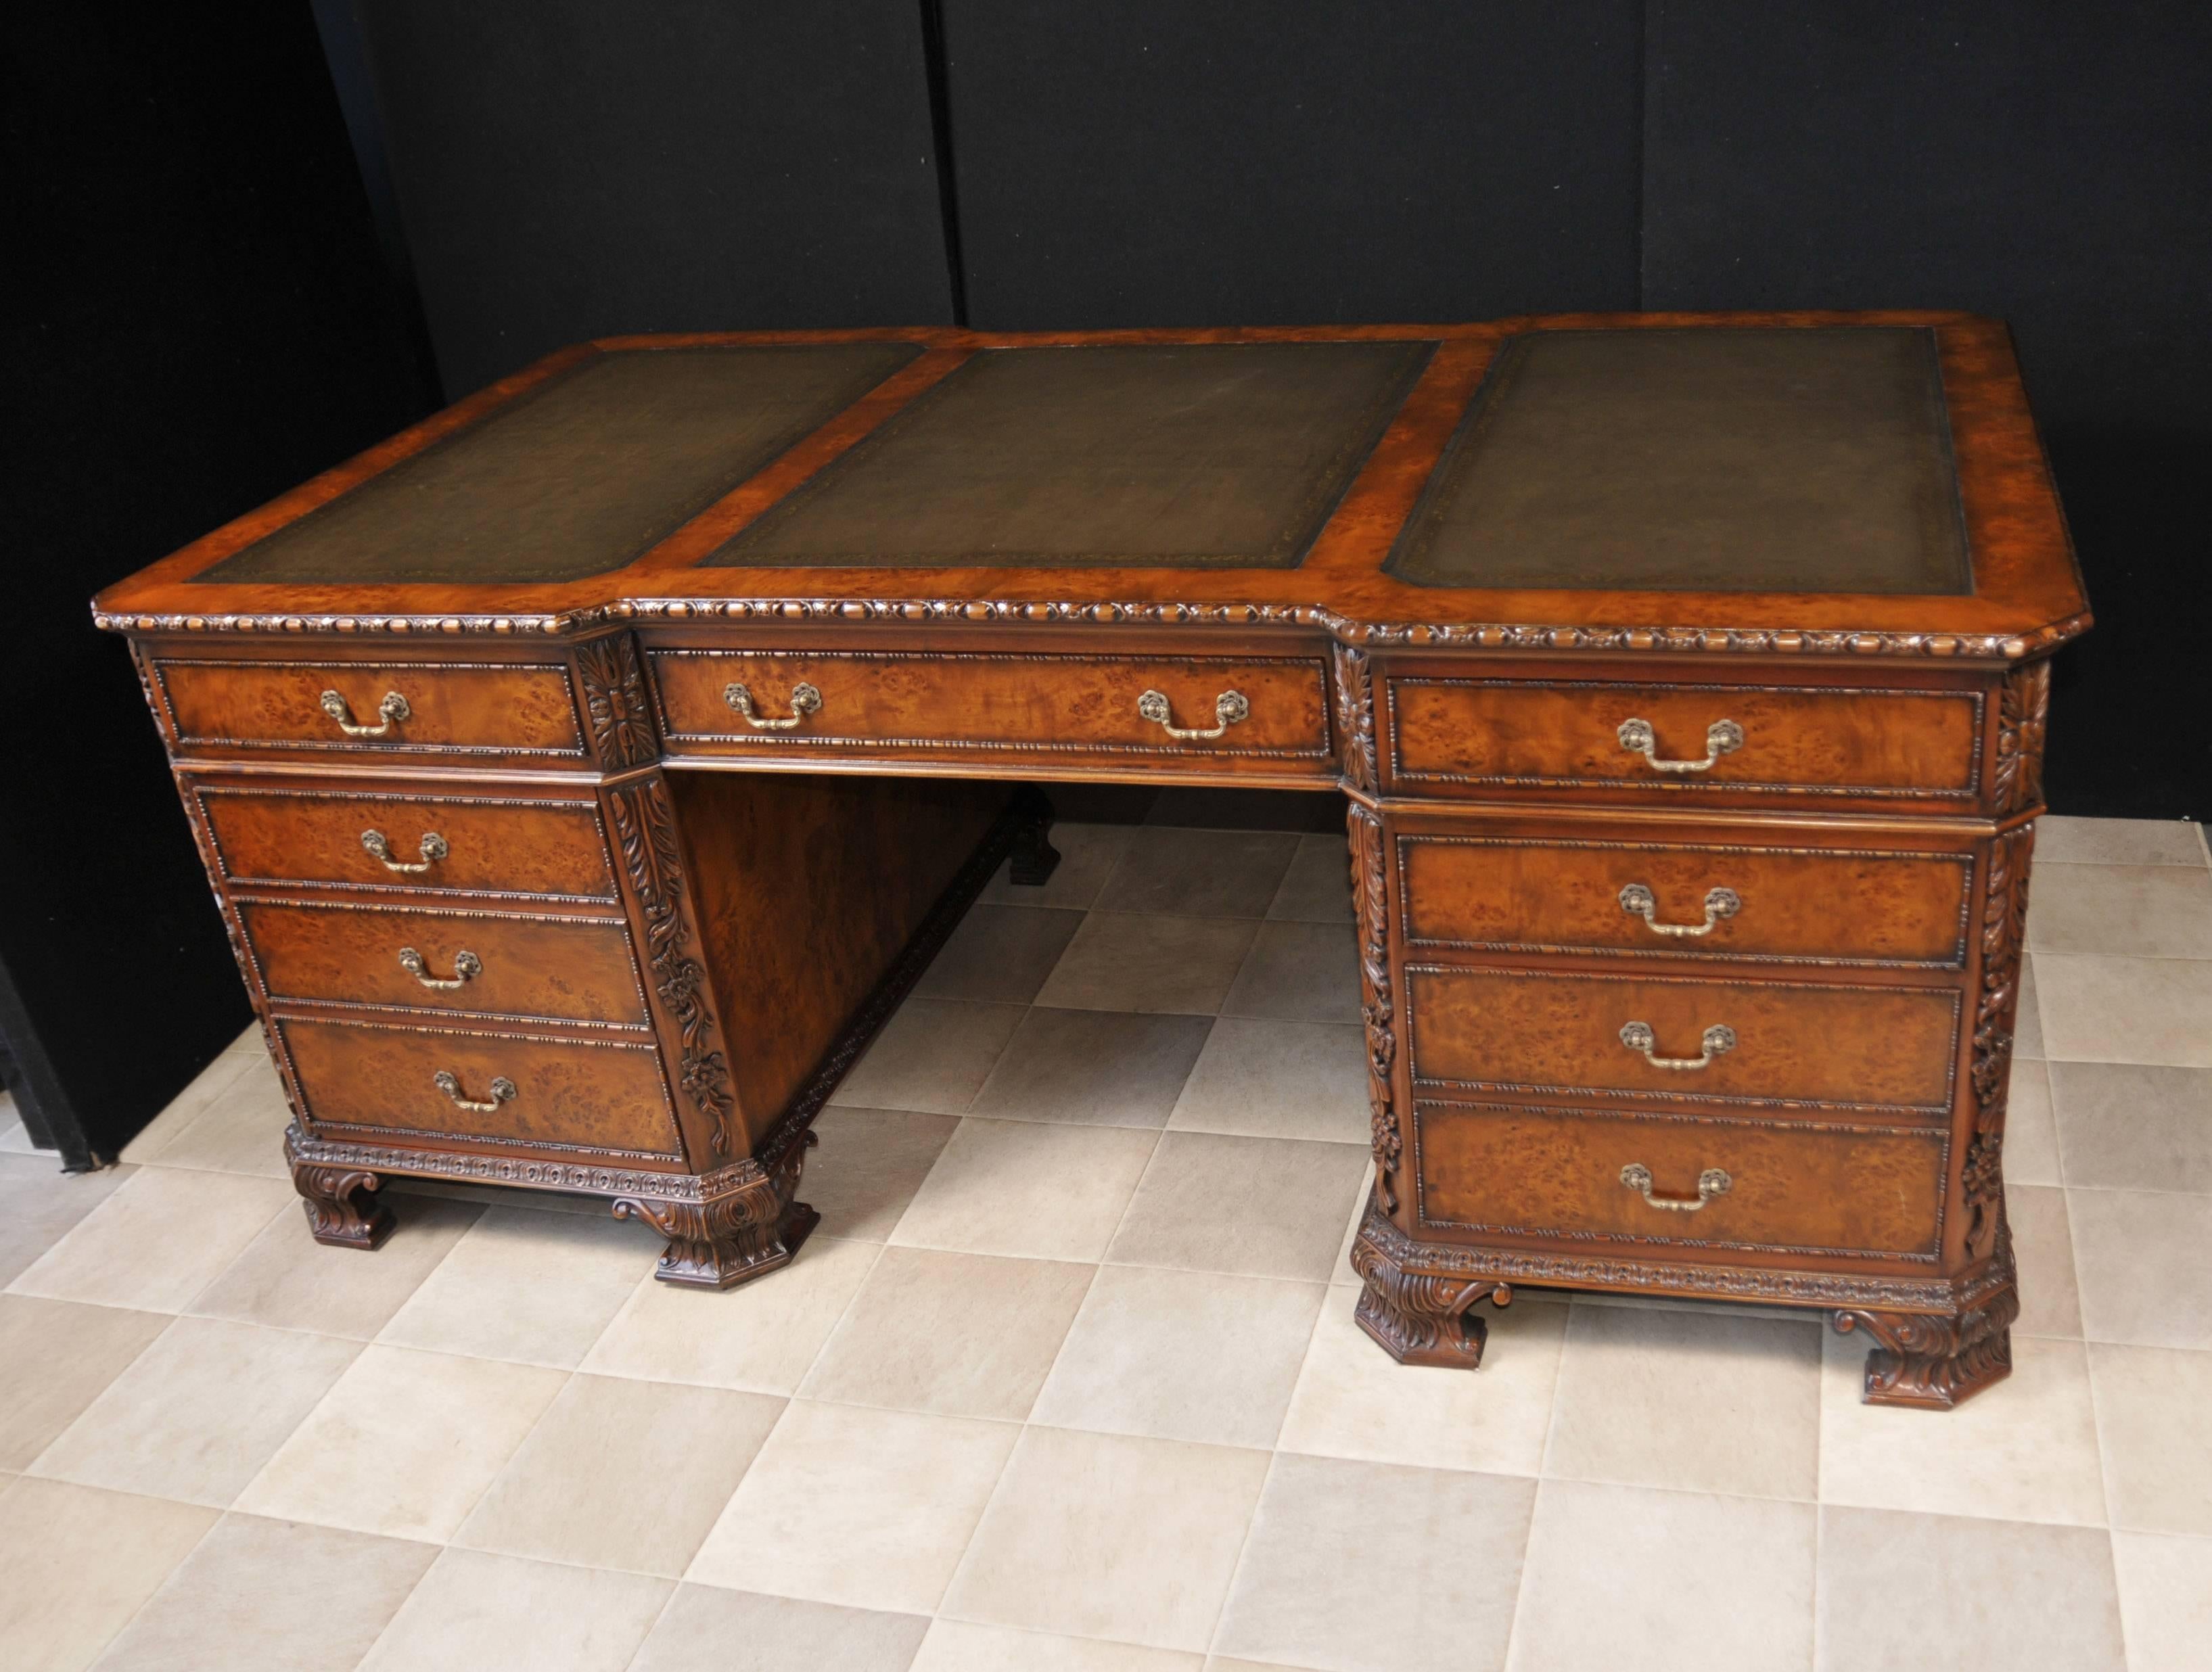 Exquisite Regency style partners desk in walnut.
A partners desk refers to the fact that there are drawers on both sides of the desk.
The two pedestals have one side drawers and the other side a cabinet (or they could be switched so both sides are